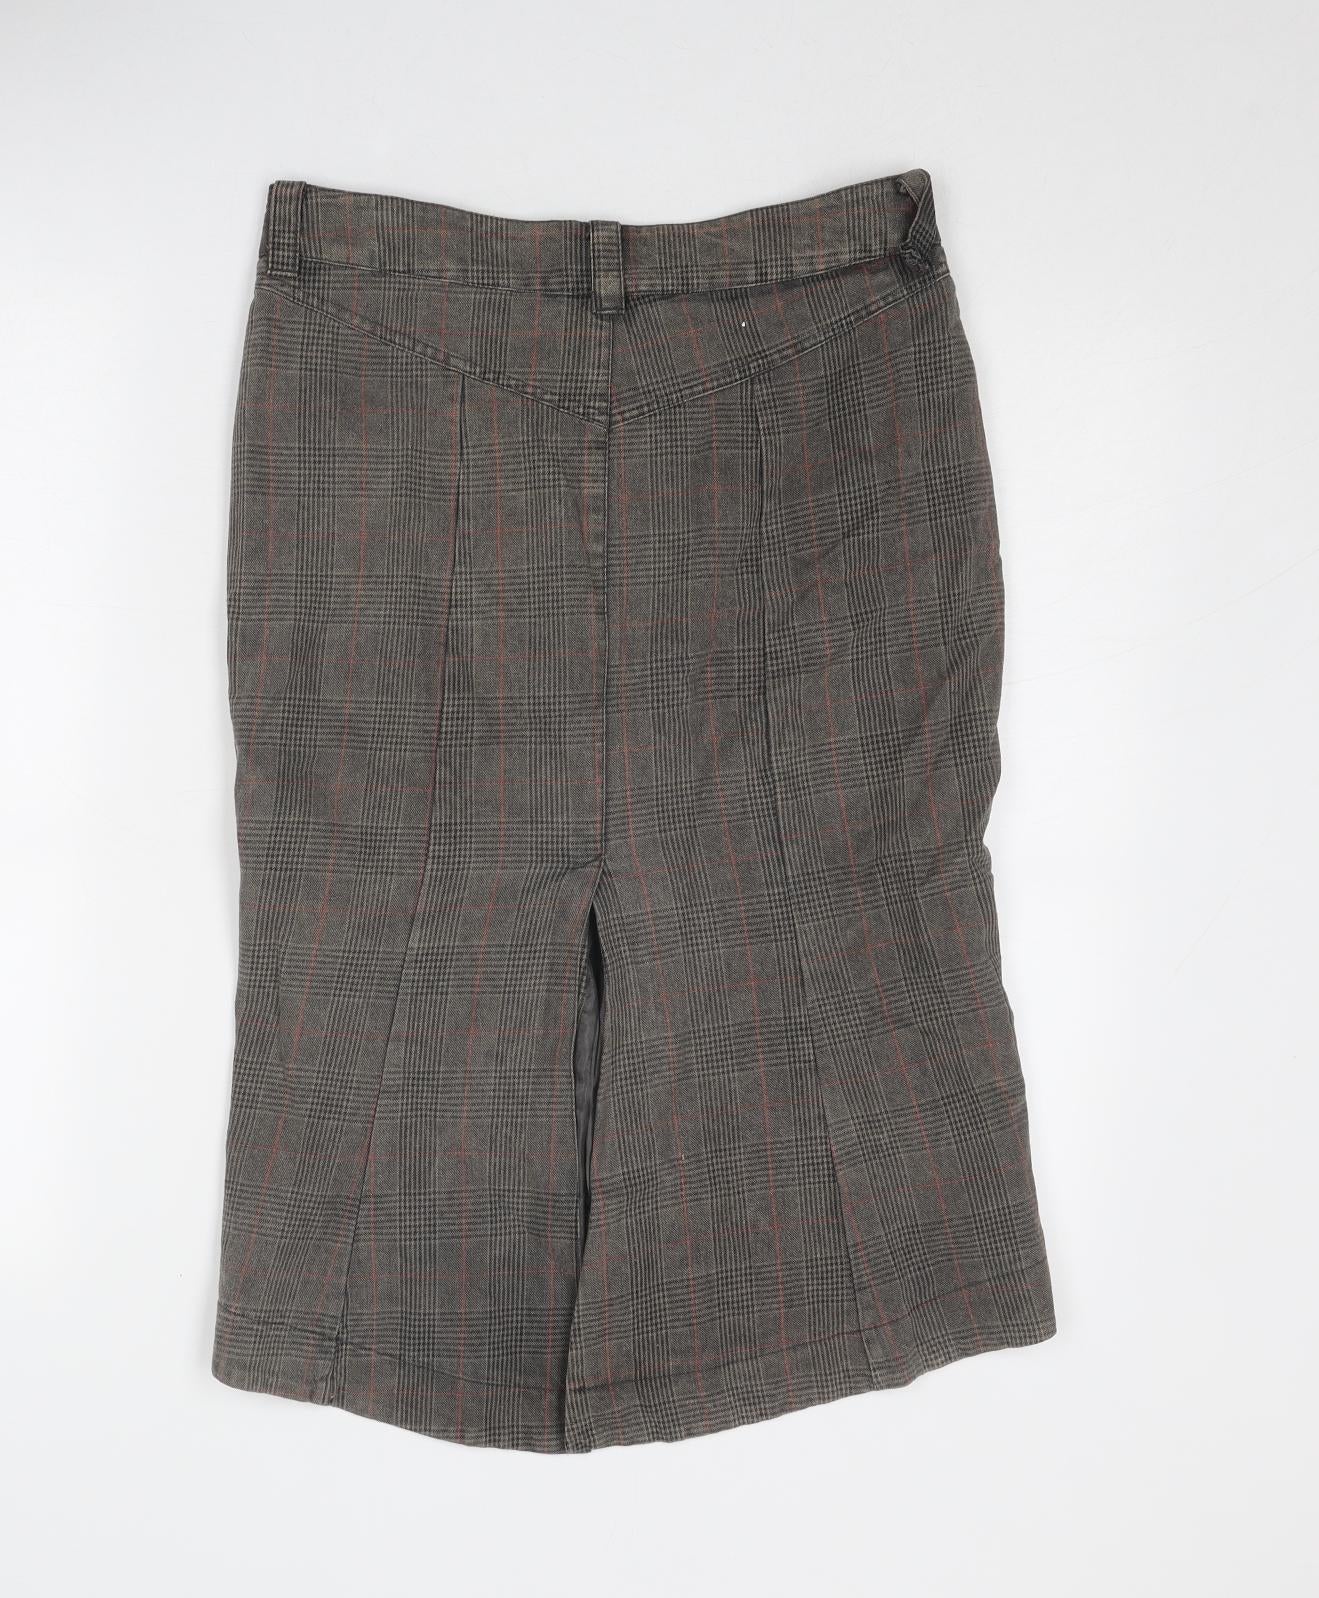 Bohemia Womens Brown Plaid Polyester A-Line Skirt Size S Zip